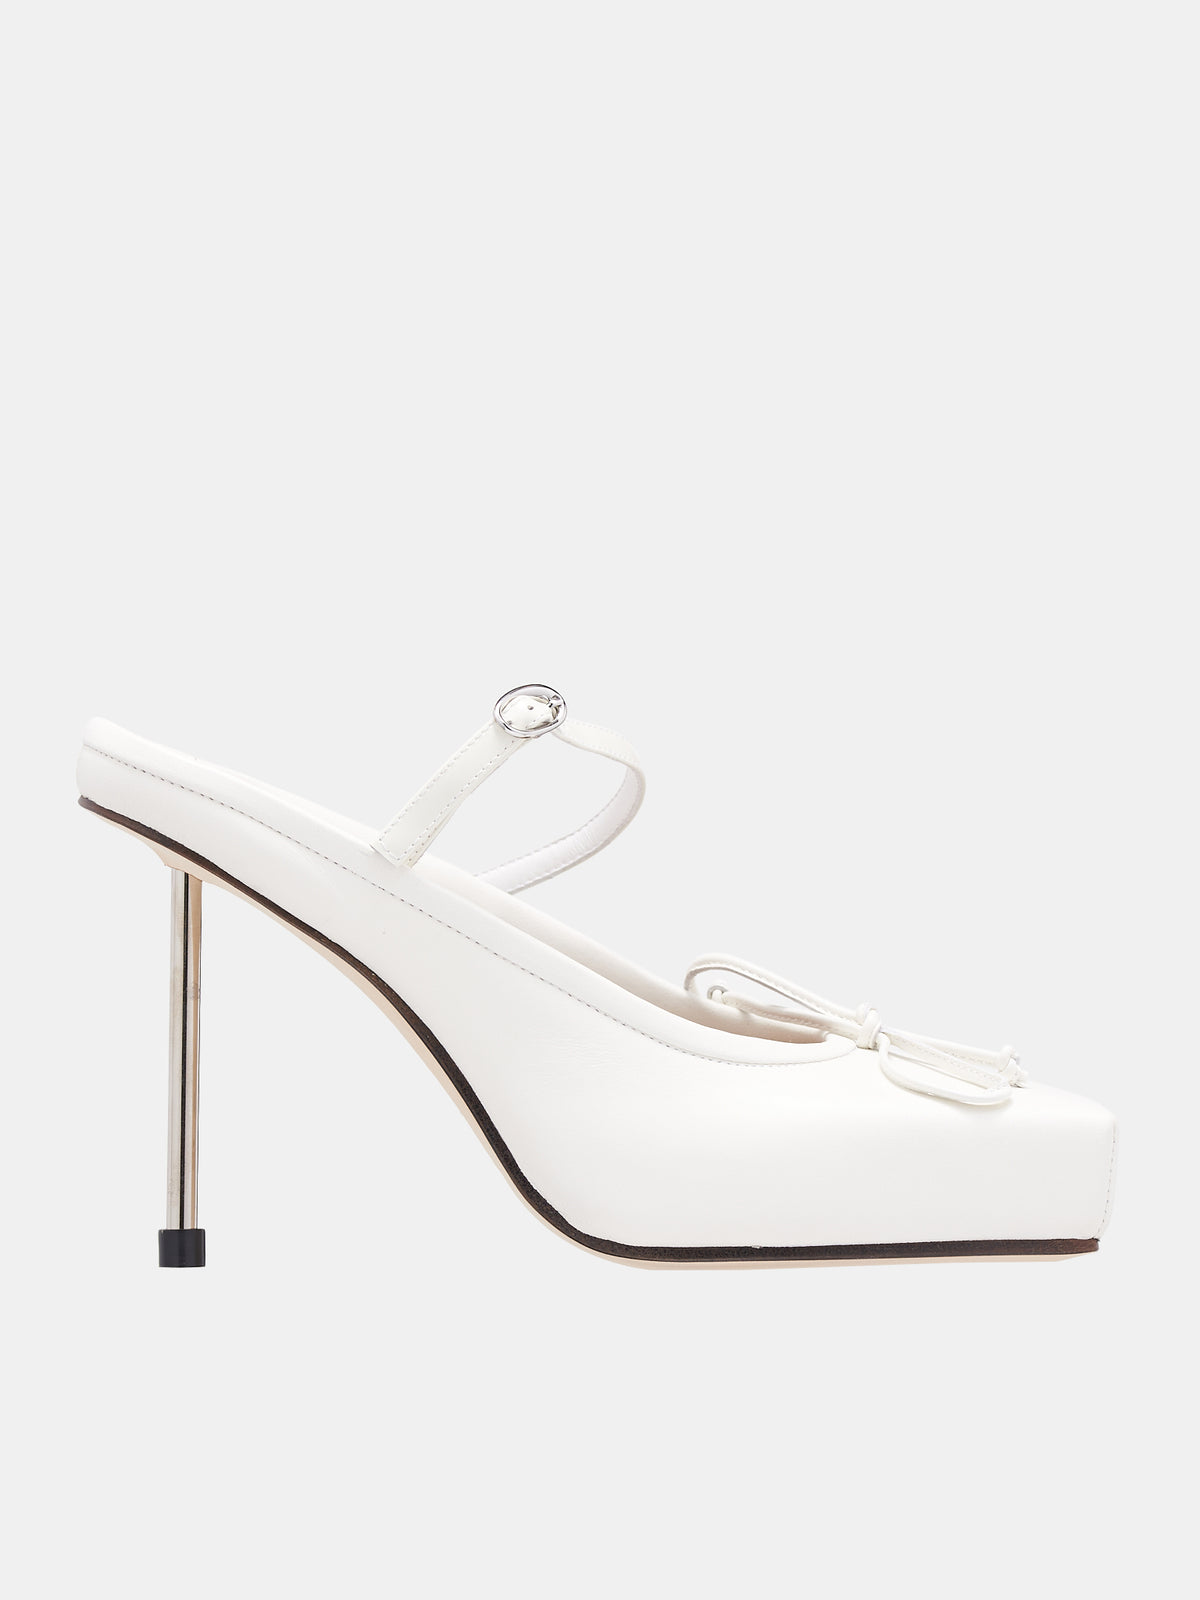 Les chaussures Ballet (233F0120-3073-110-OFF-WHITE)